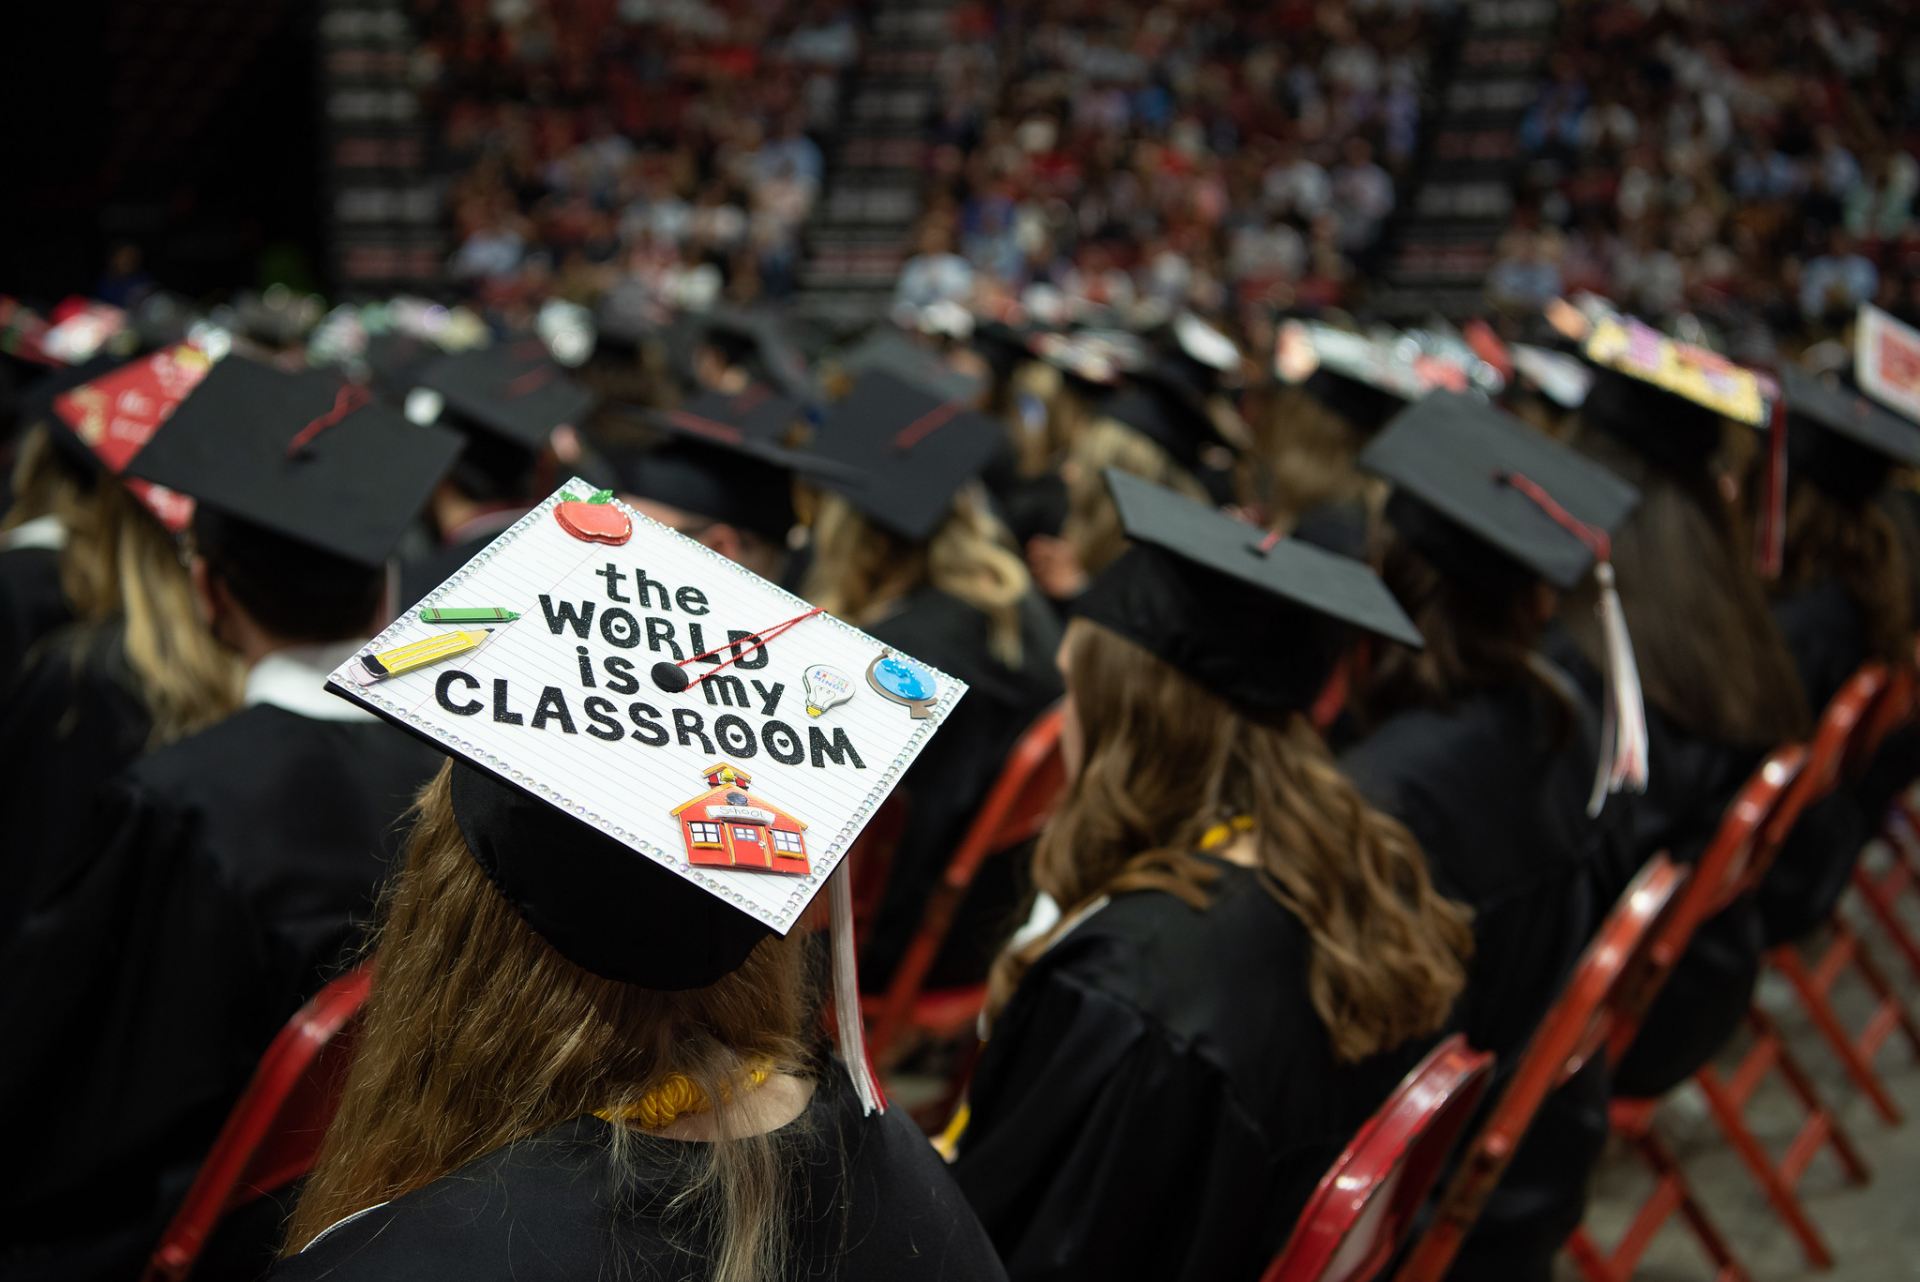 A persons graduating cap decorated with "the world is my classroom."